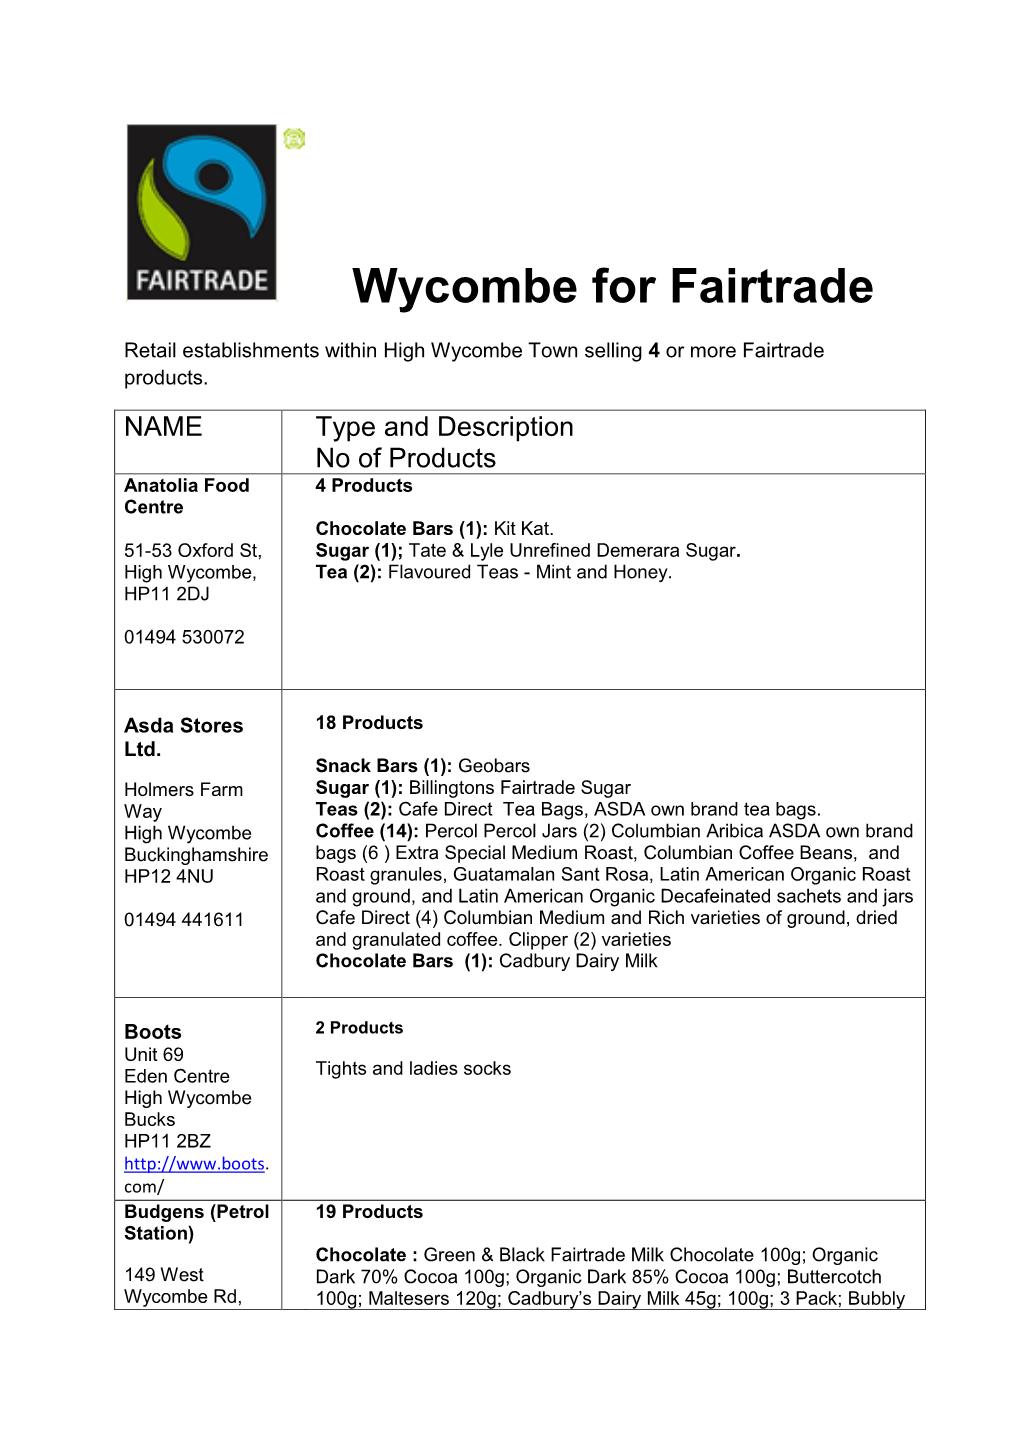 Wycombe for Fairtrade